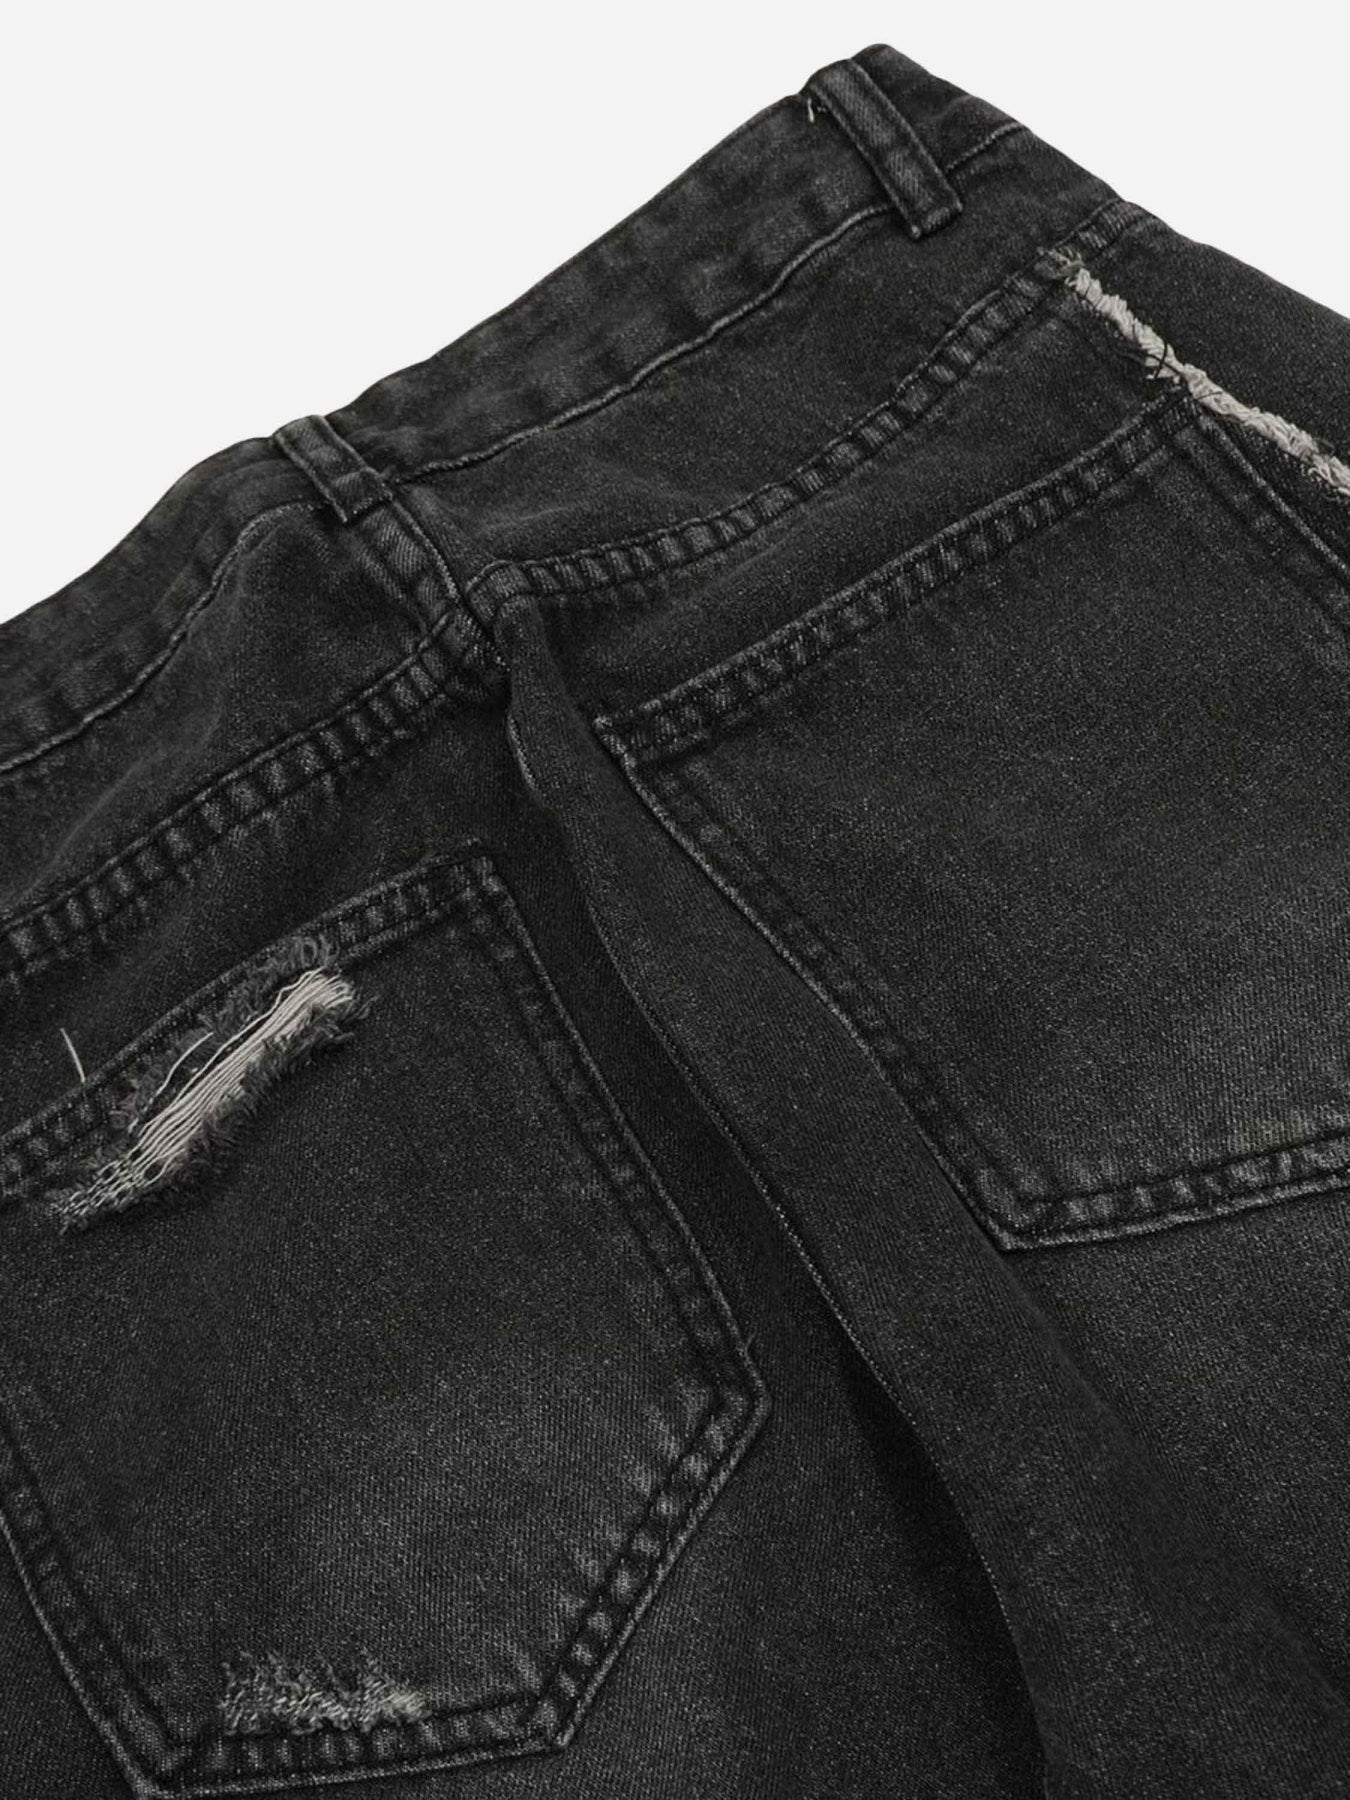 Thesupermade Washed Multi-pocket Work Jeans - 1830